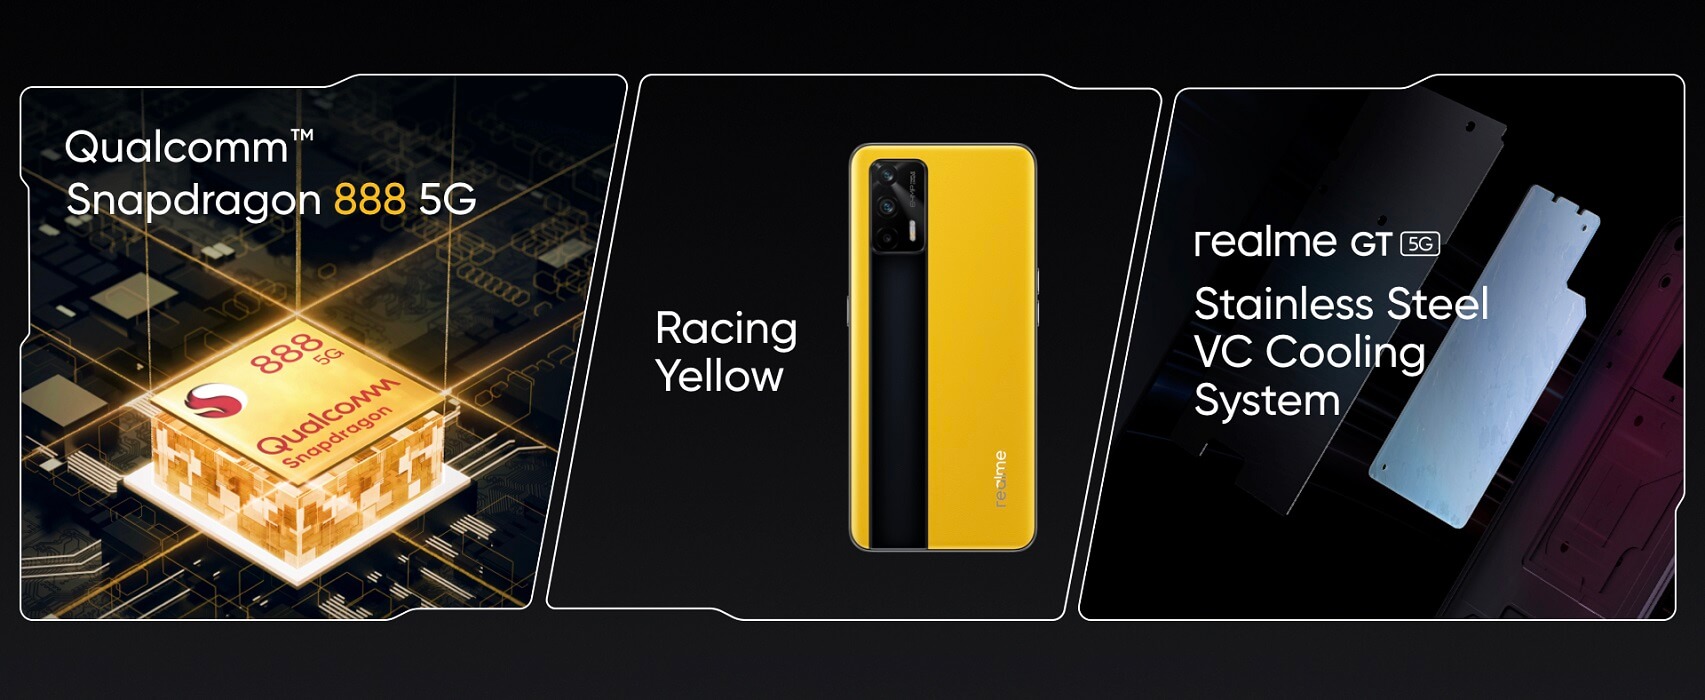 Realme GT 5G features 2